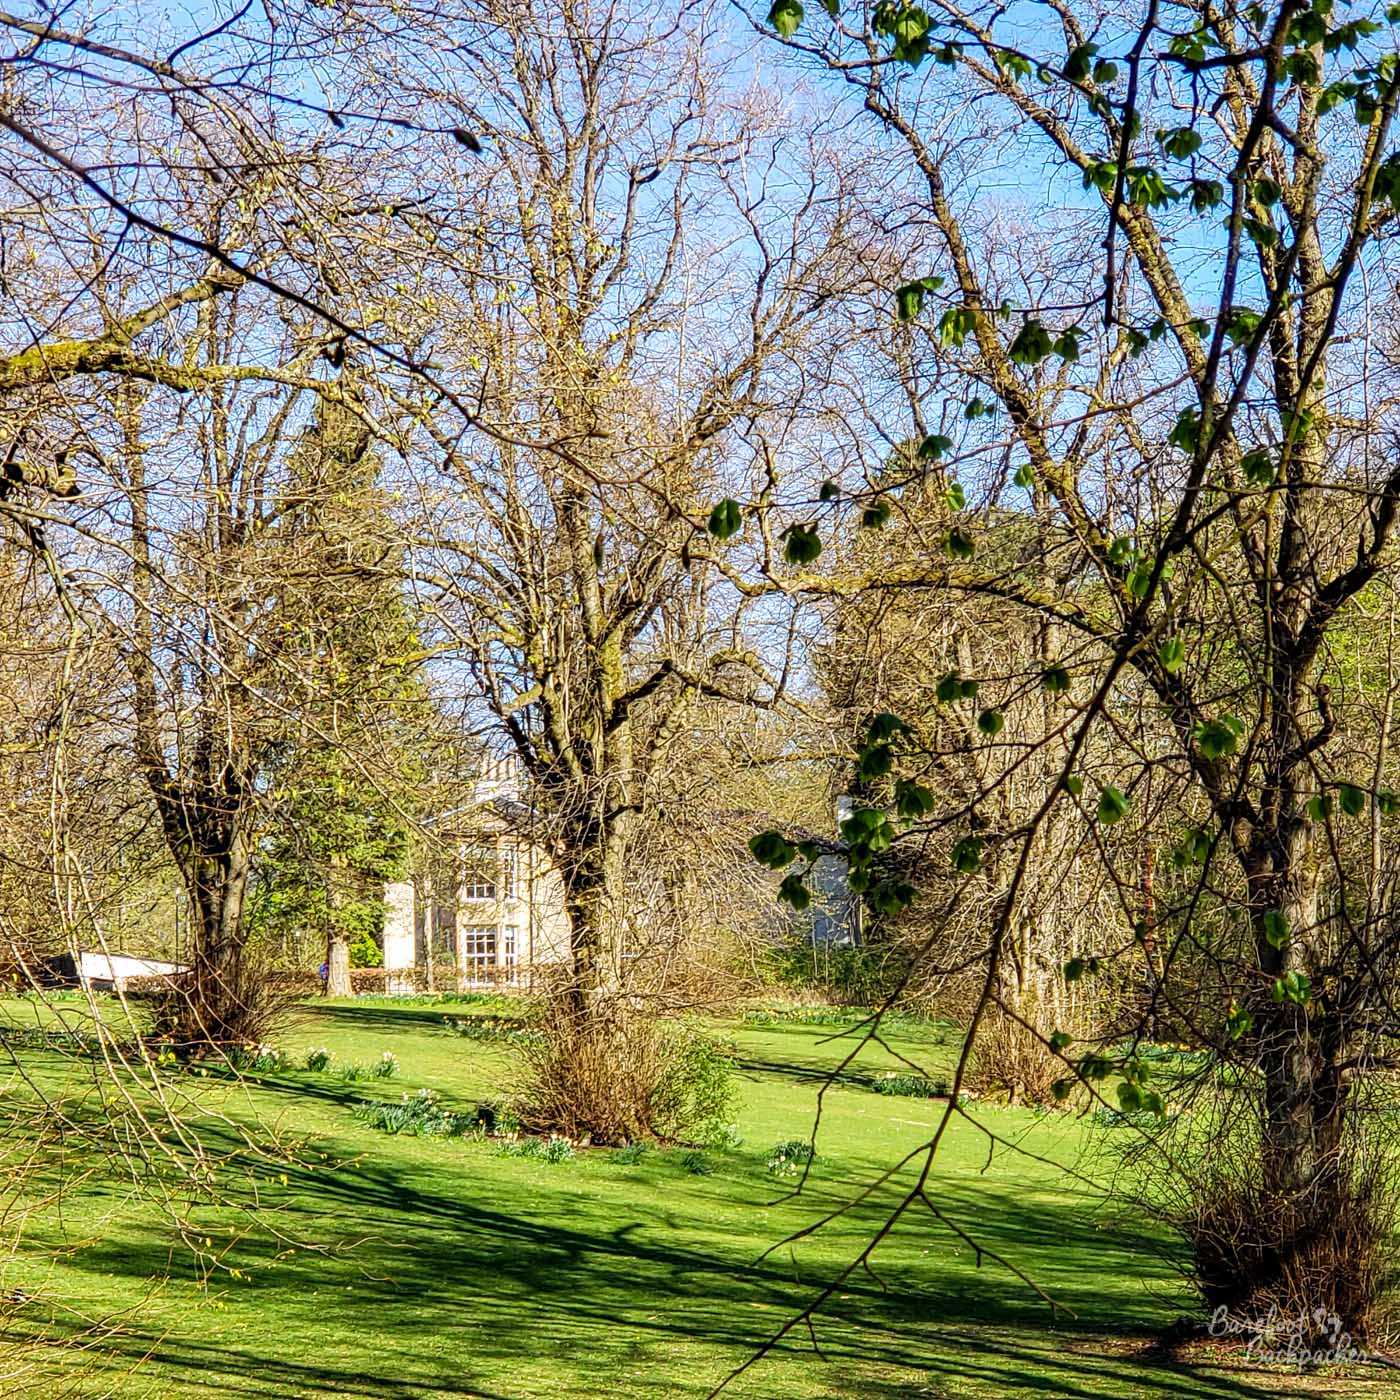 A view of a park slightly obscured by tree branches. In the distance is a stone-block building.